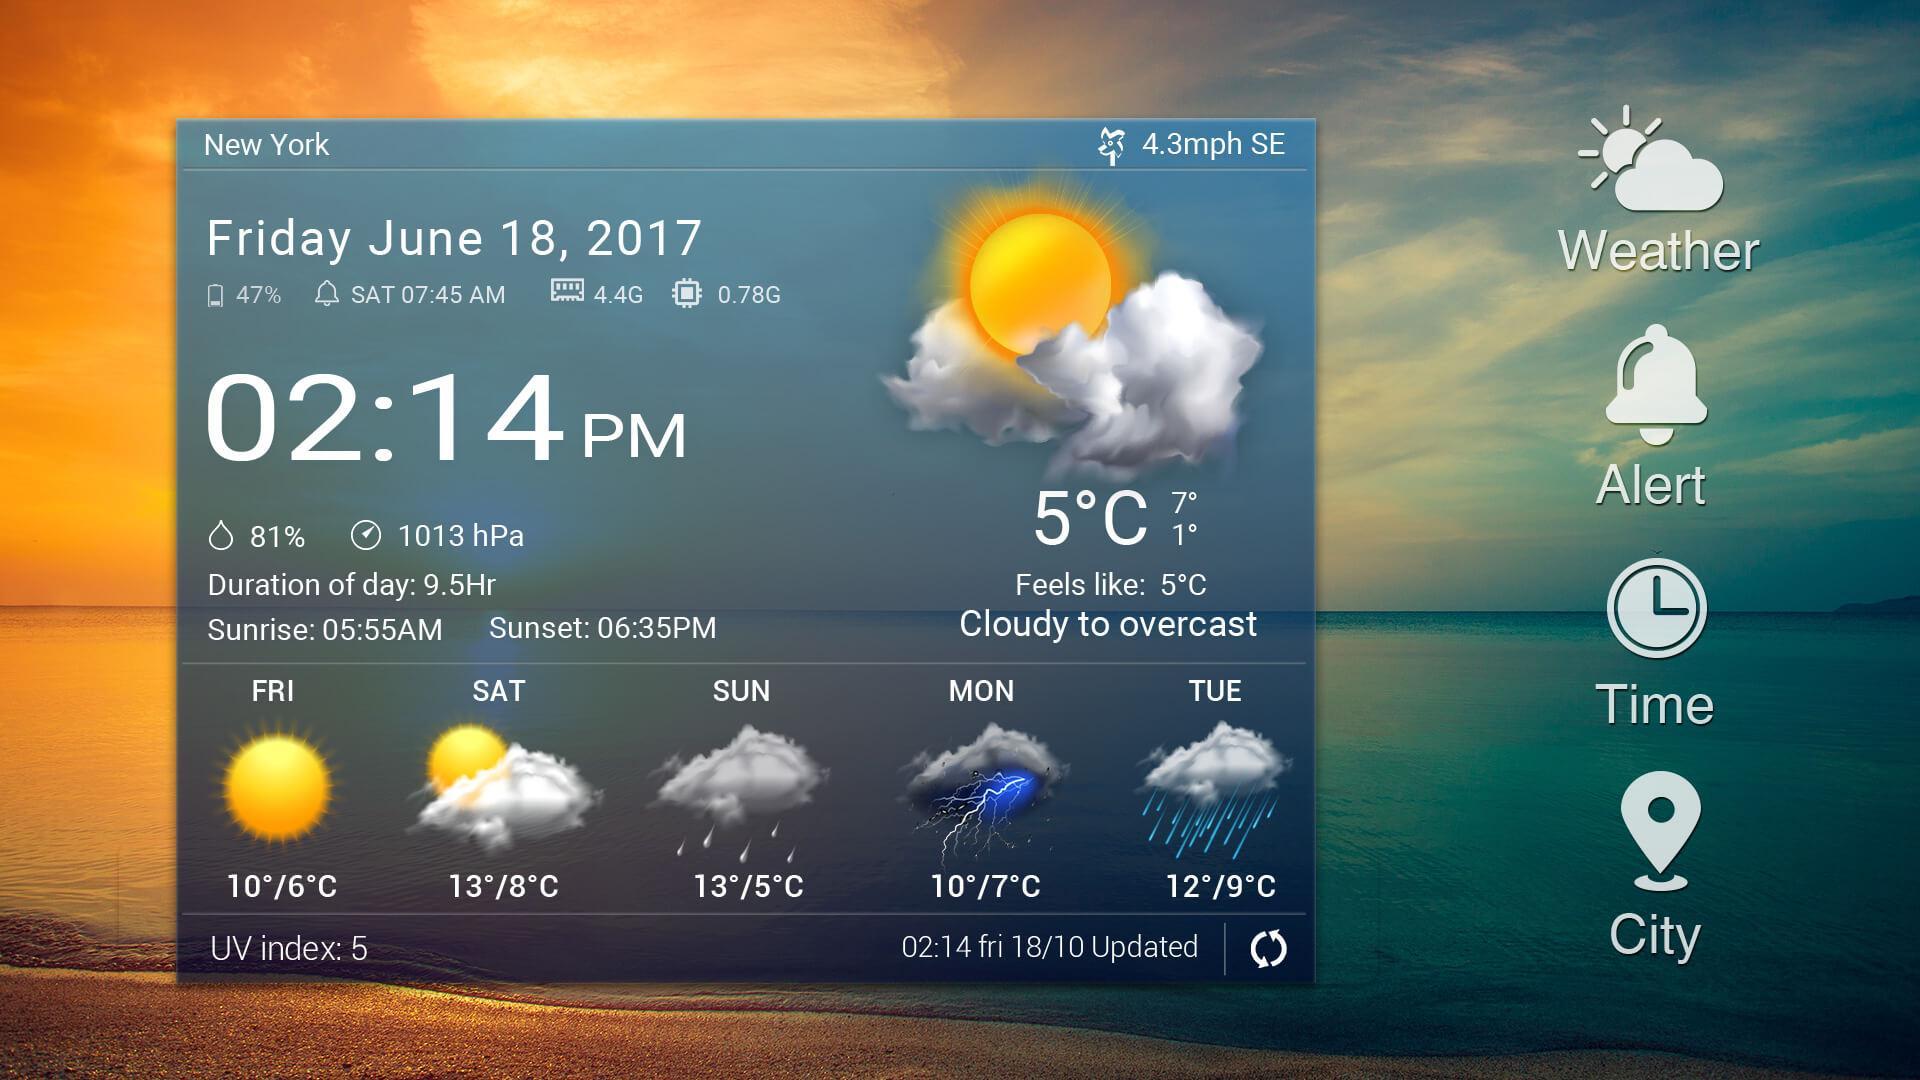 Daily weather forecast widget☂ for Android - APK Download